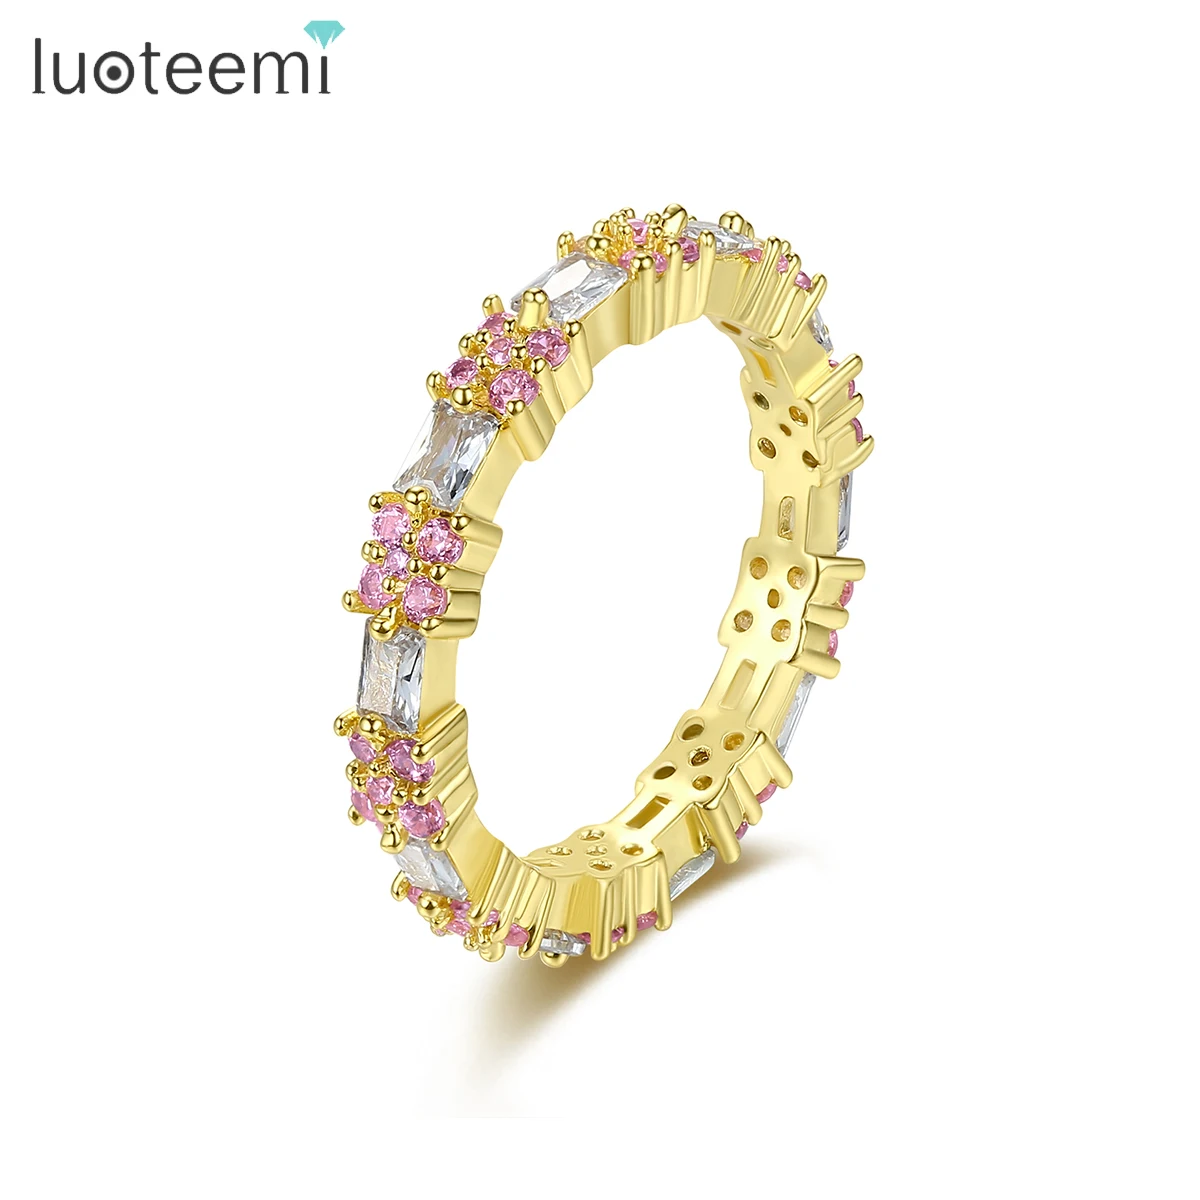 

LUOTEEMI Four Sizes Pink and White Cubic Stone Finger Ring for Women Cute Design Shinning Bohemia Jewelry Friends Gifts